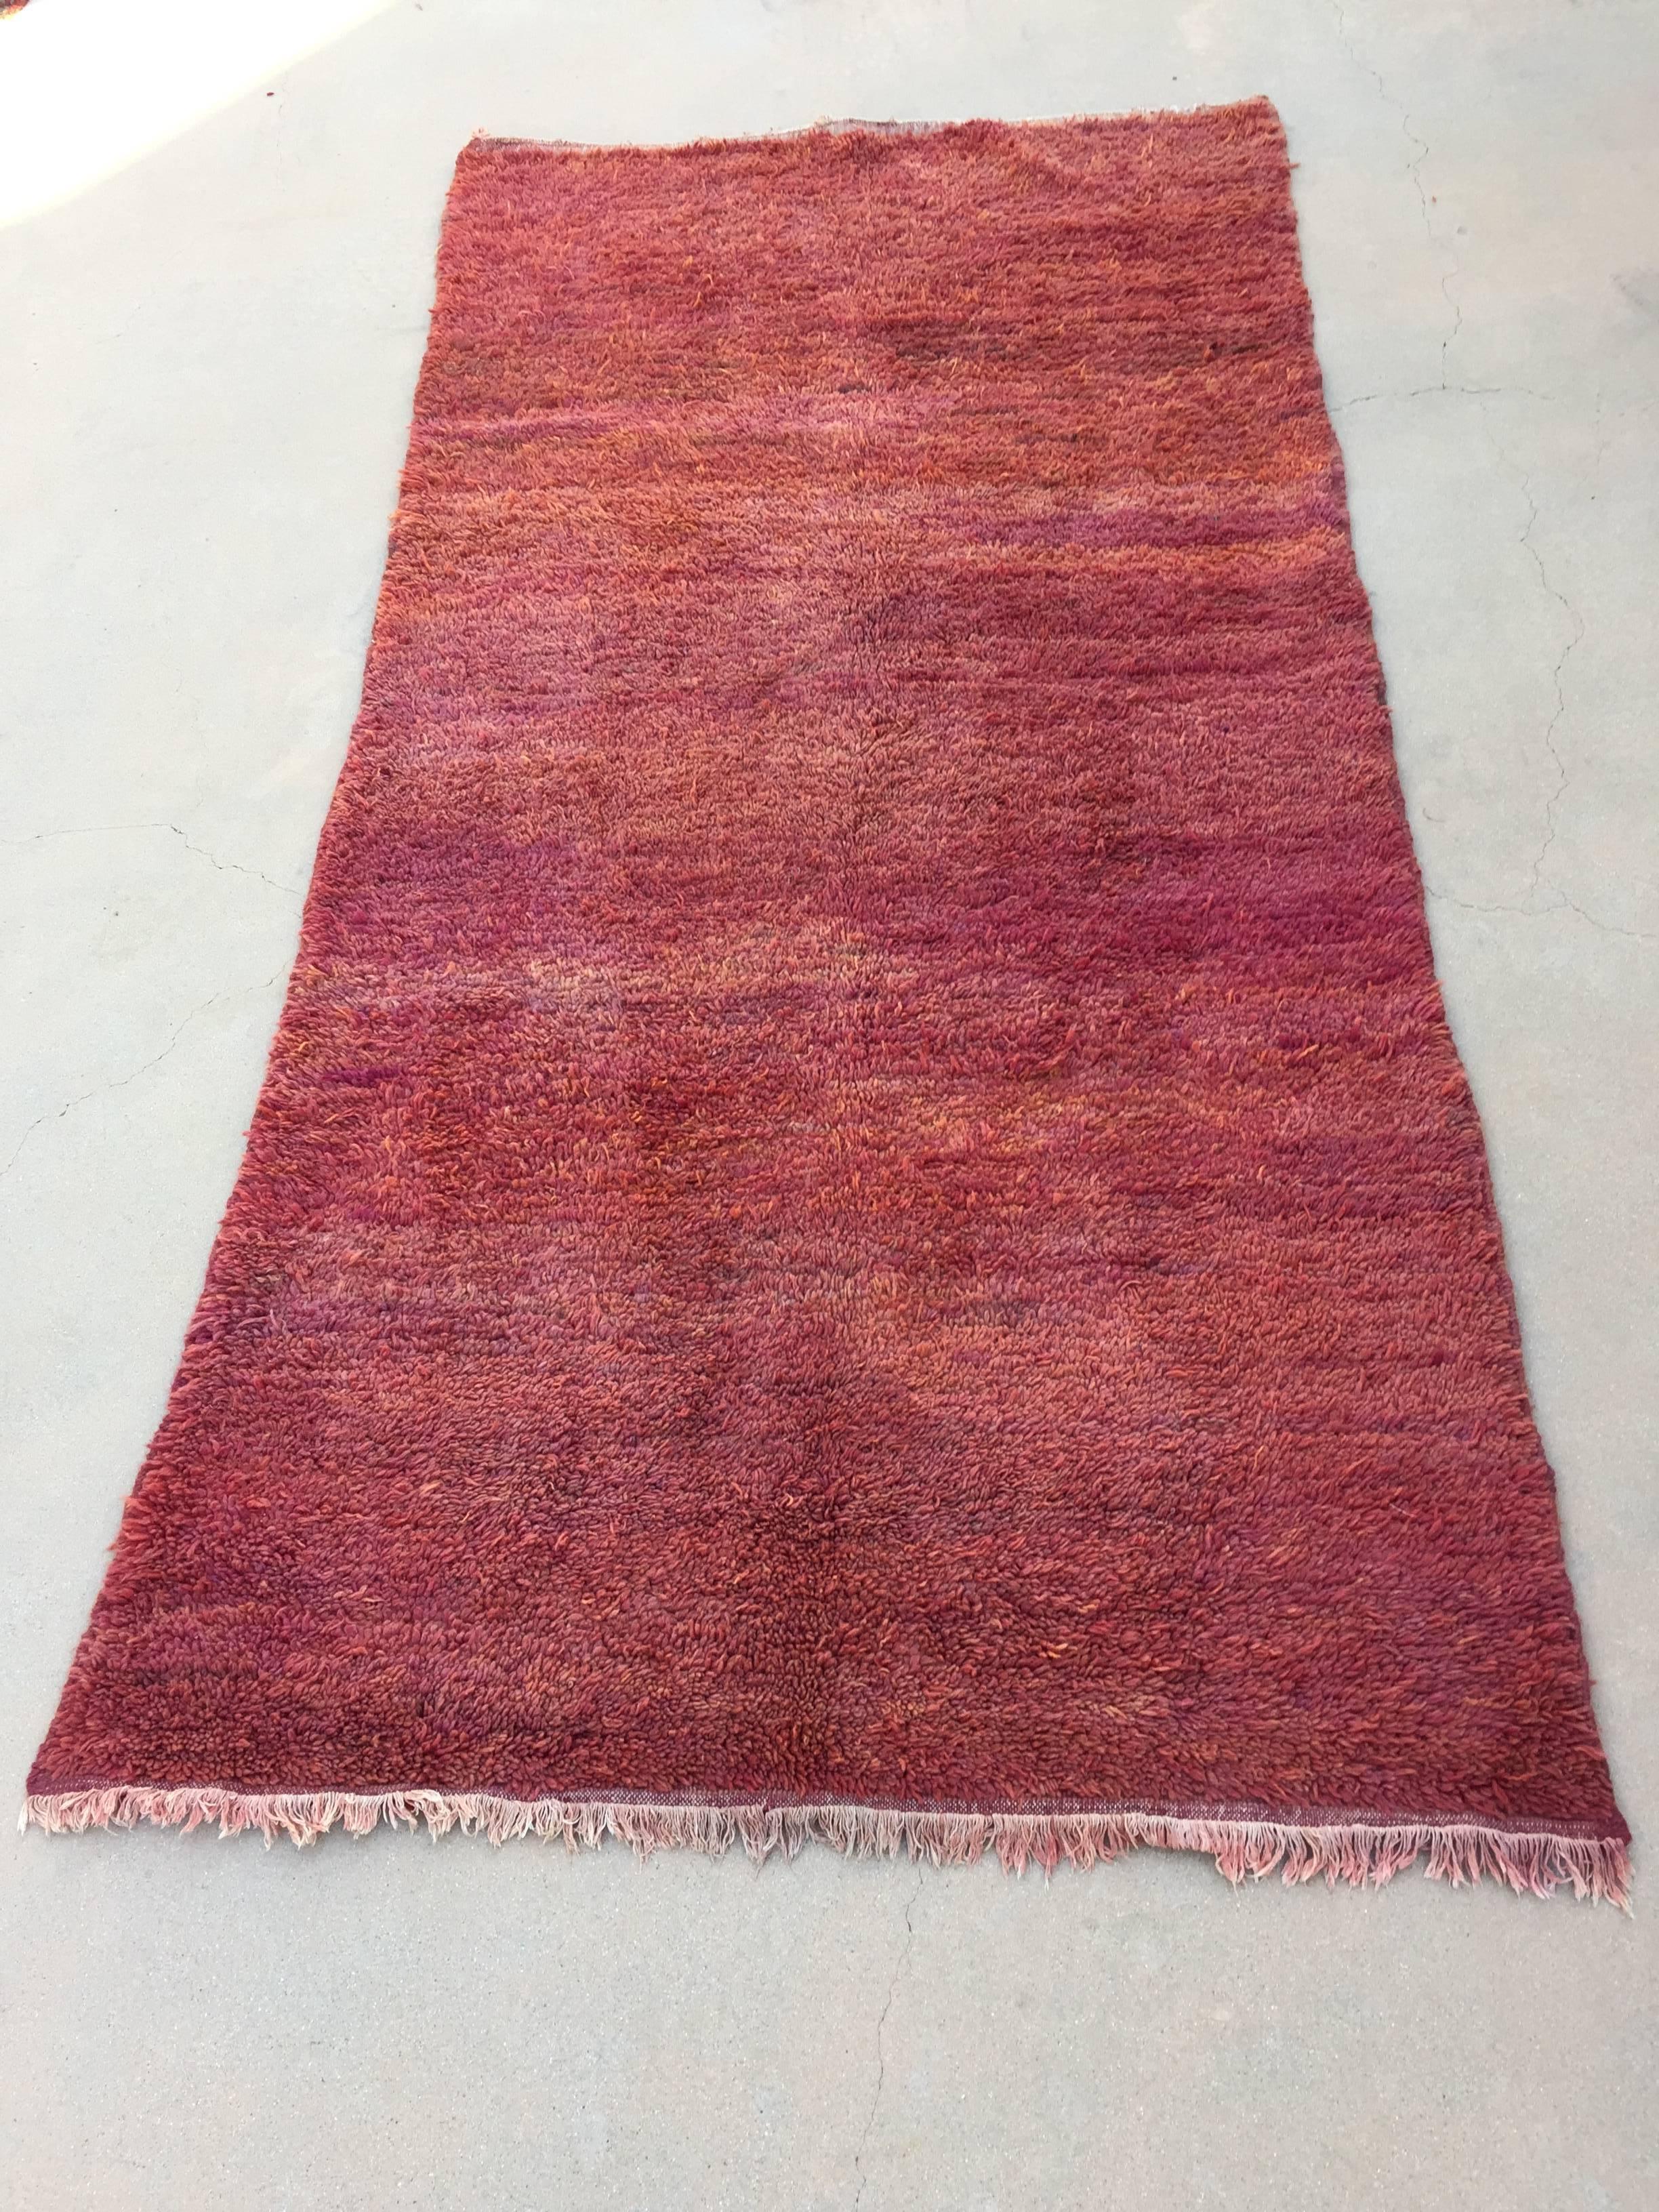 Moroccan Authentic Ethnic Rug Red Shaggy High Pile Wo 